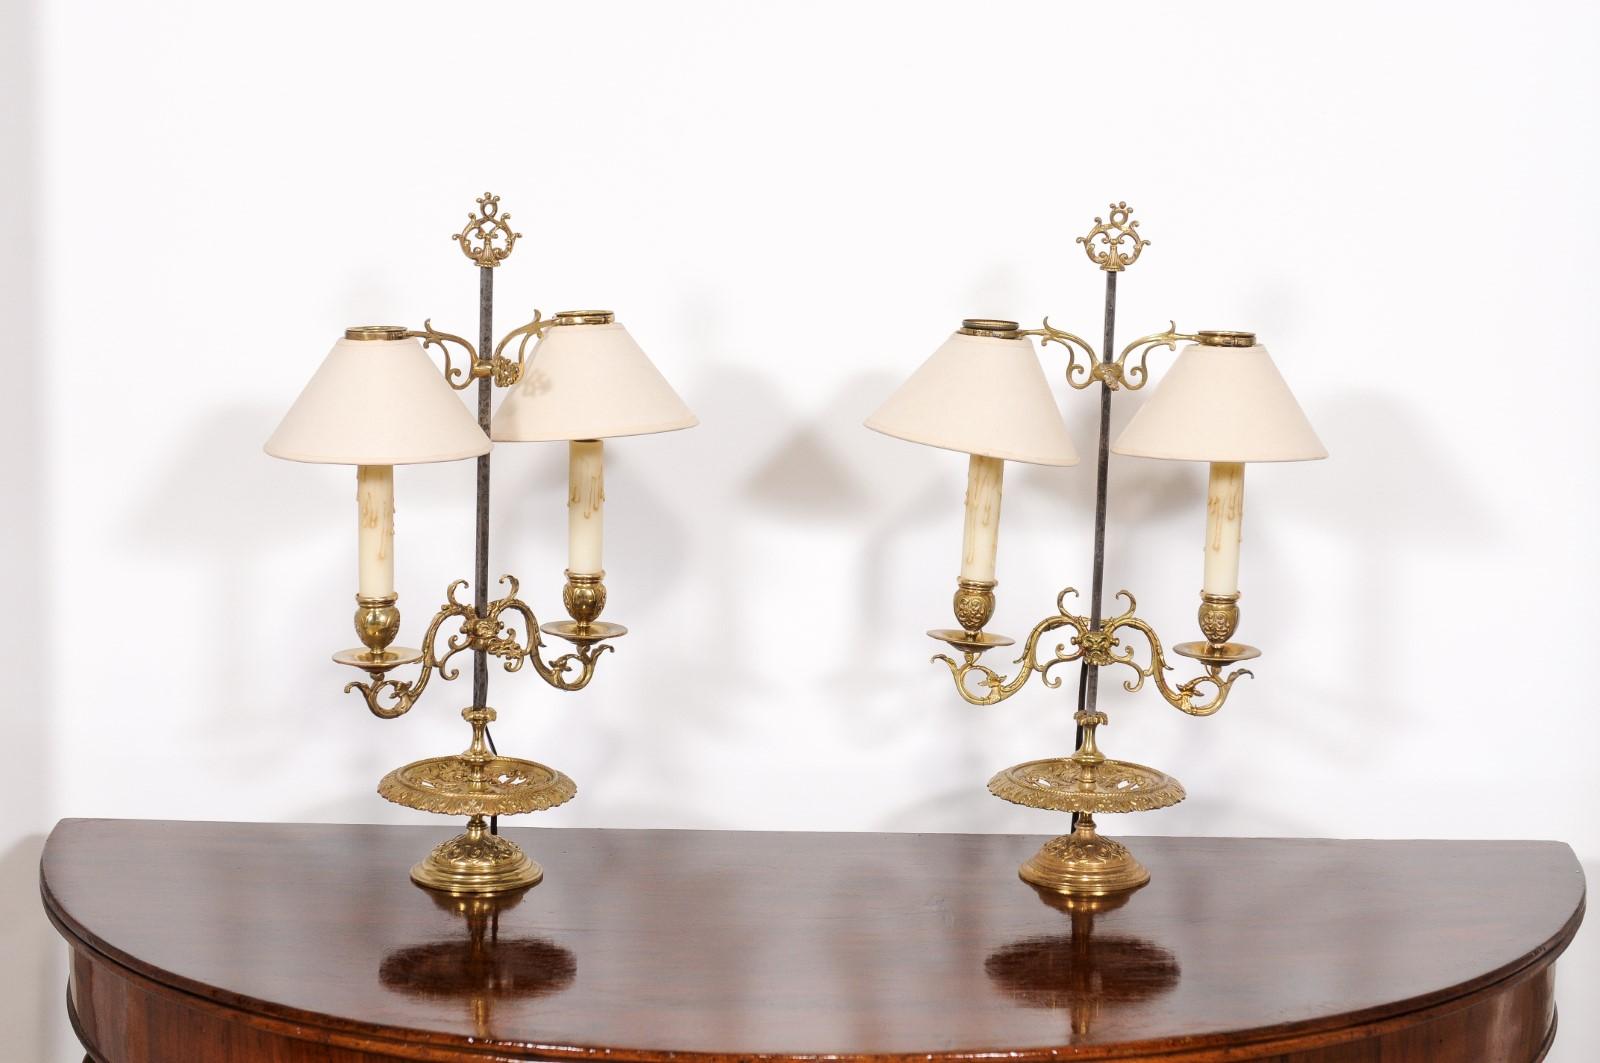 French 19th Century Brass Candlestick Lamps with Scrolling Arms, a Wired Pair In Good Condition For Sale In Atlanta, GA